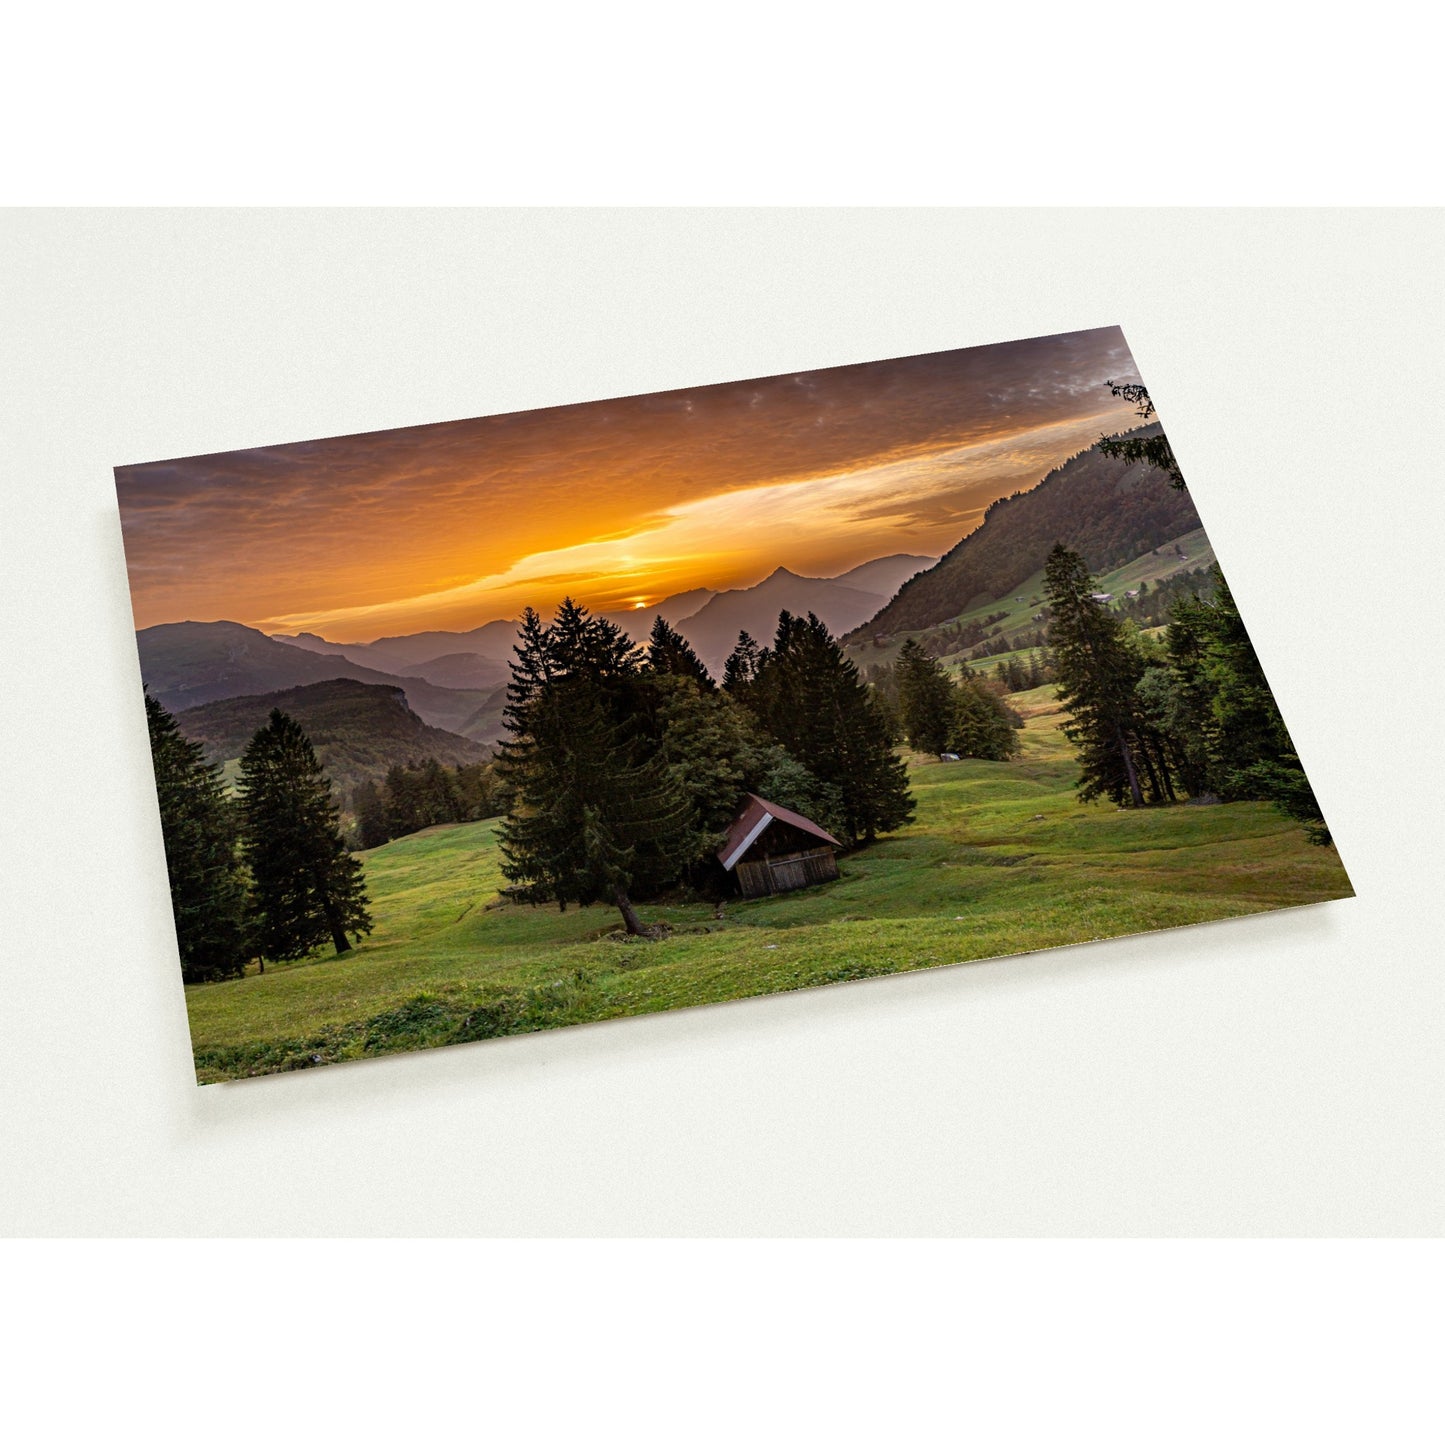 Sunset on the Ibergeregg Set of 10 cards (2-sided, with envelopes)